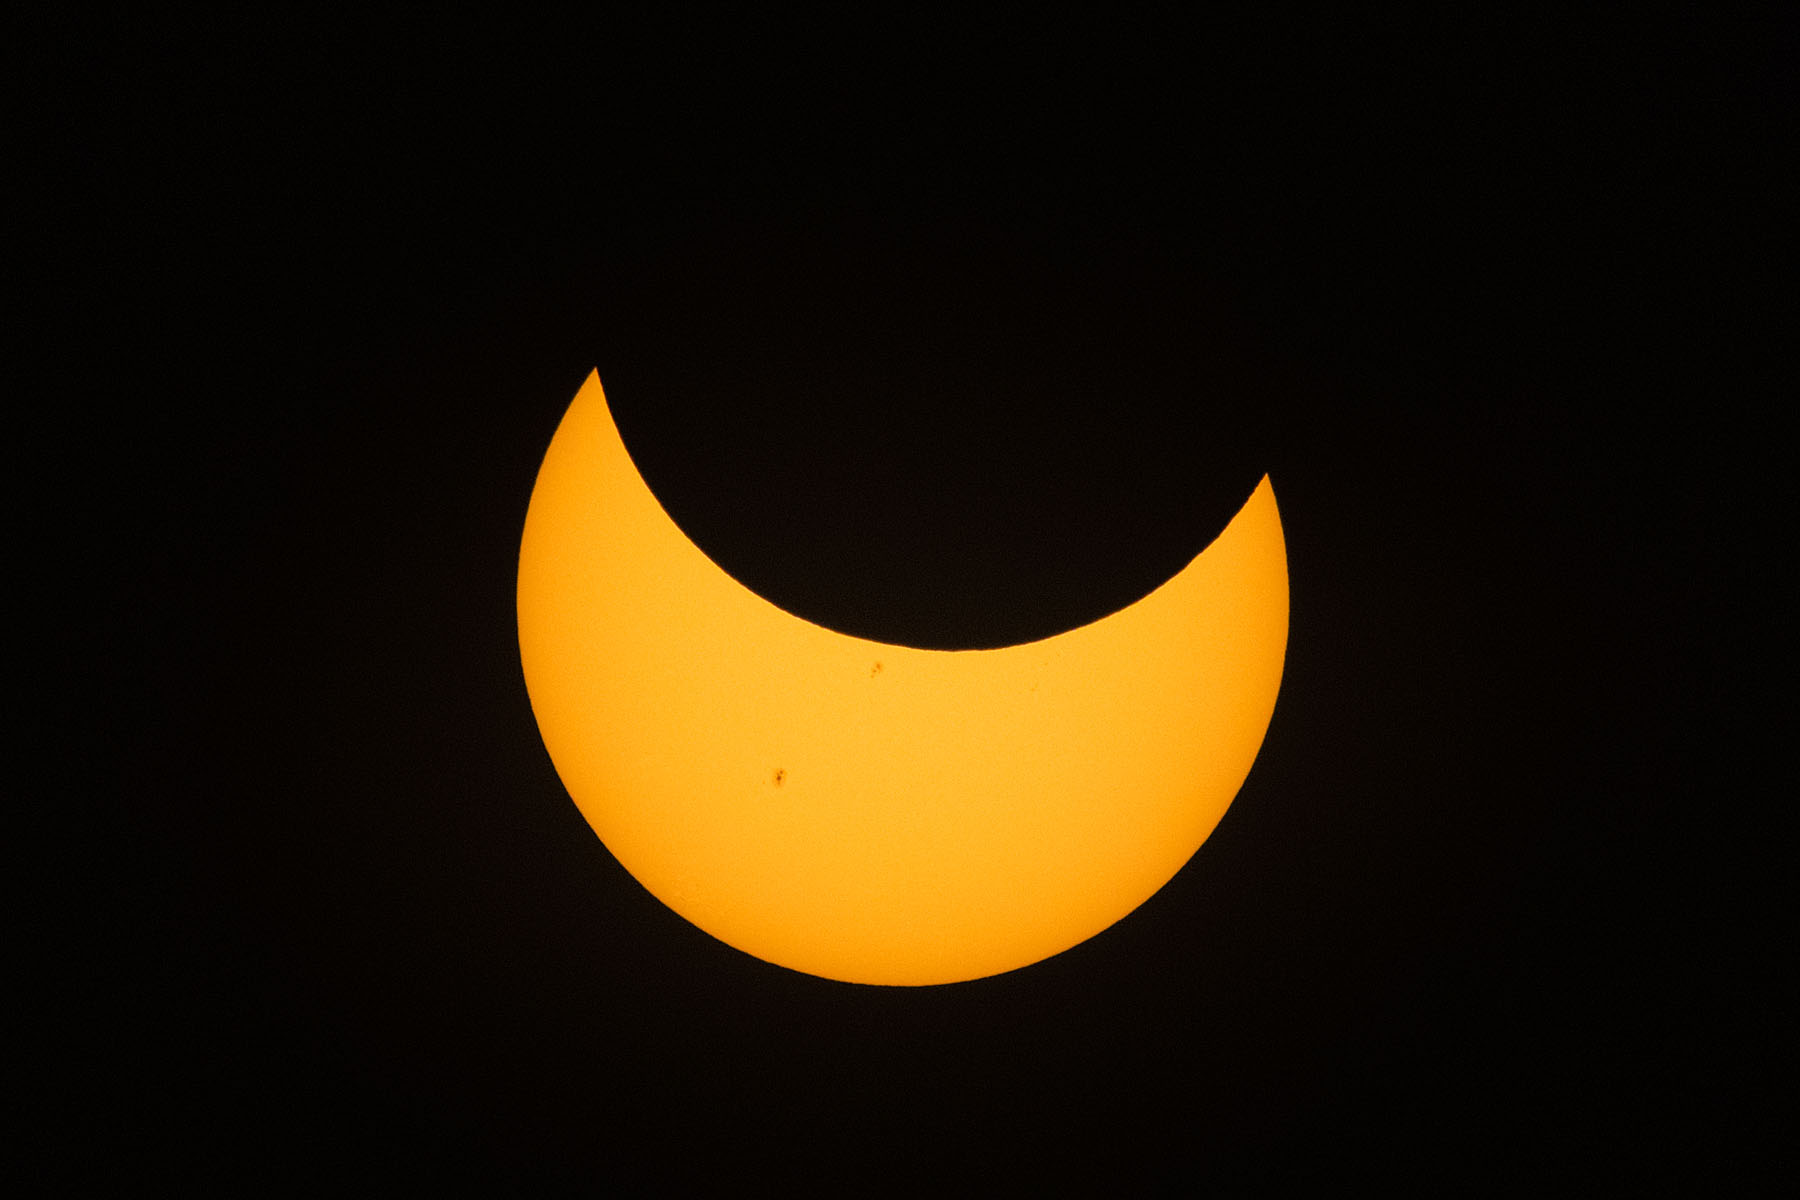 Annular solar eclipse, 36 minutes before peak, film solar filter on 100-400mm camera lens, 1.4x extender, Canon R10 camera.  Click for next photo.